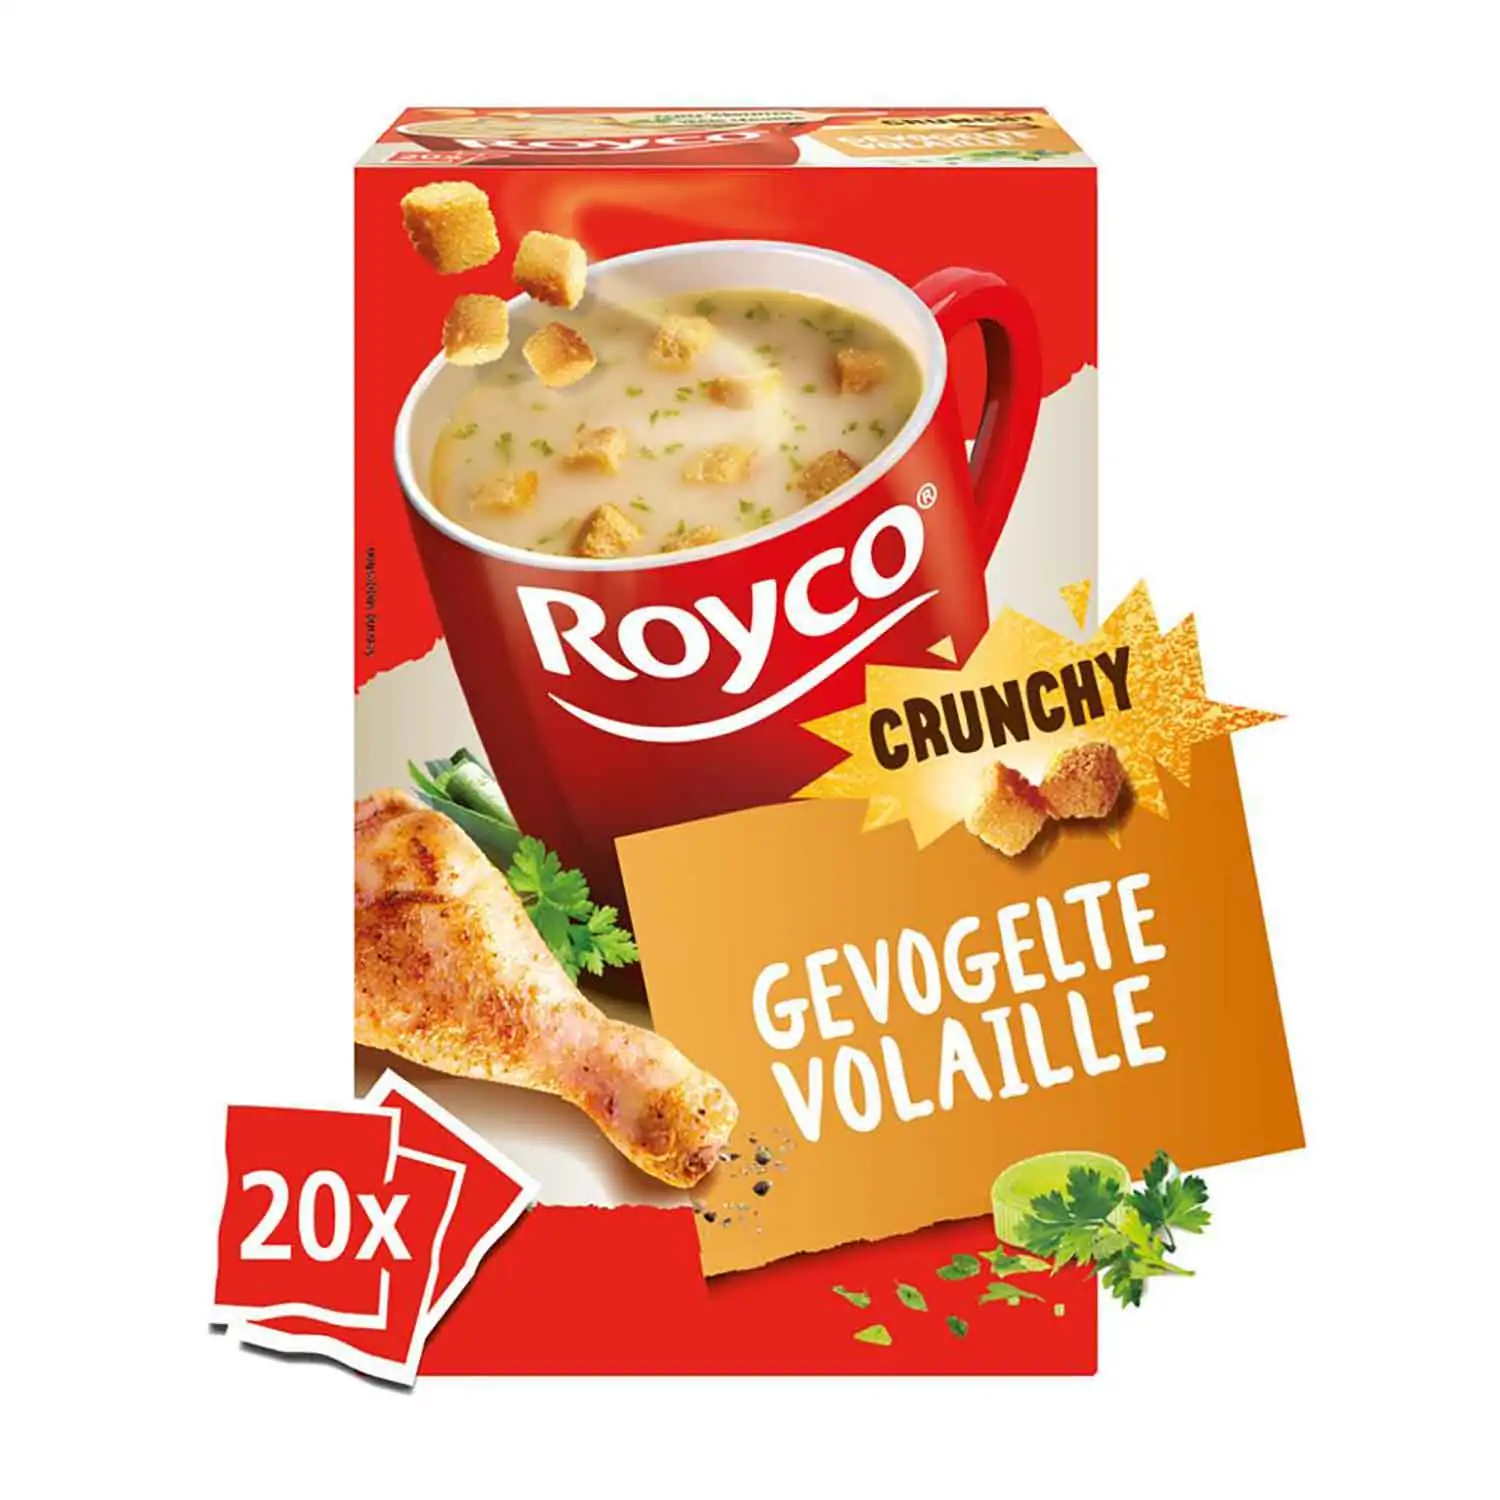 20x Royco crunchy volaille 20,5g - Buy at Real Tobacco